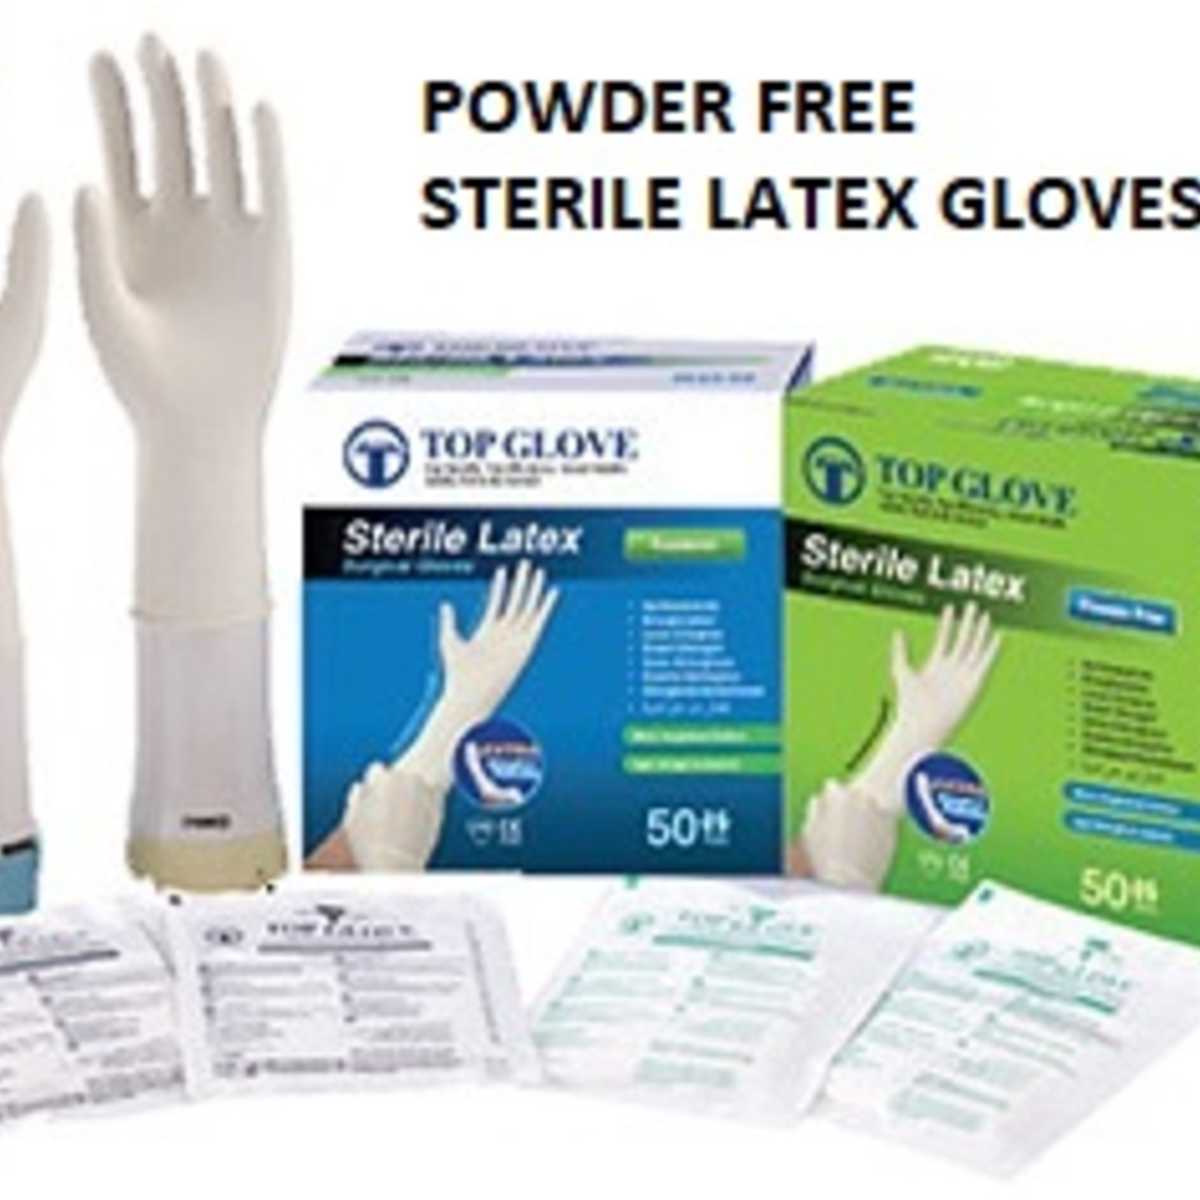 8.5 Sterile Latex Surgical Glove, Powdered Free